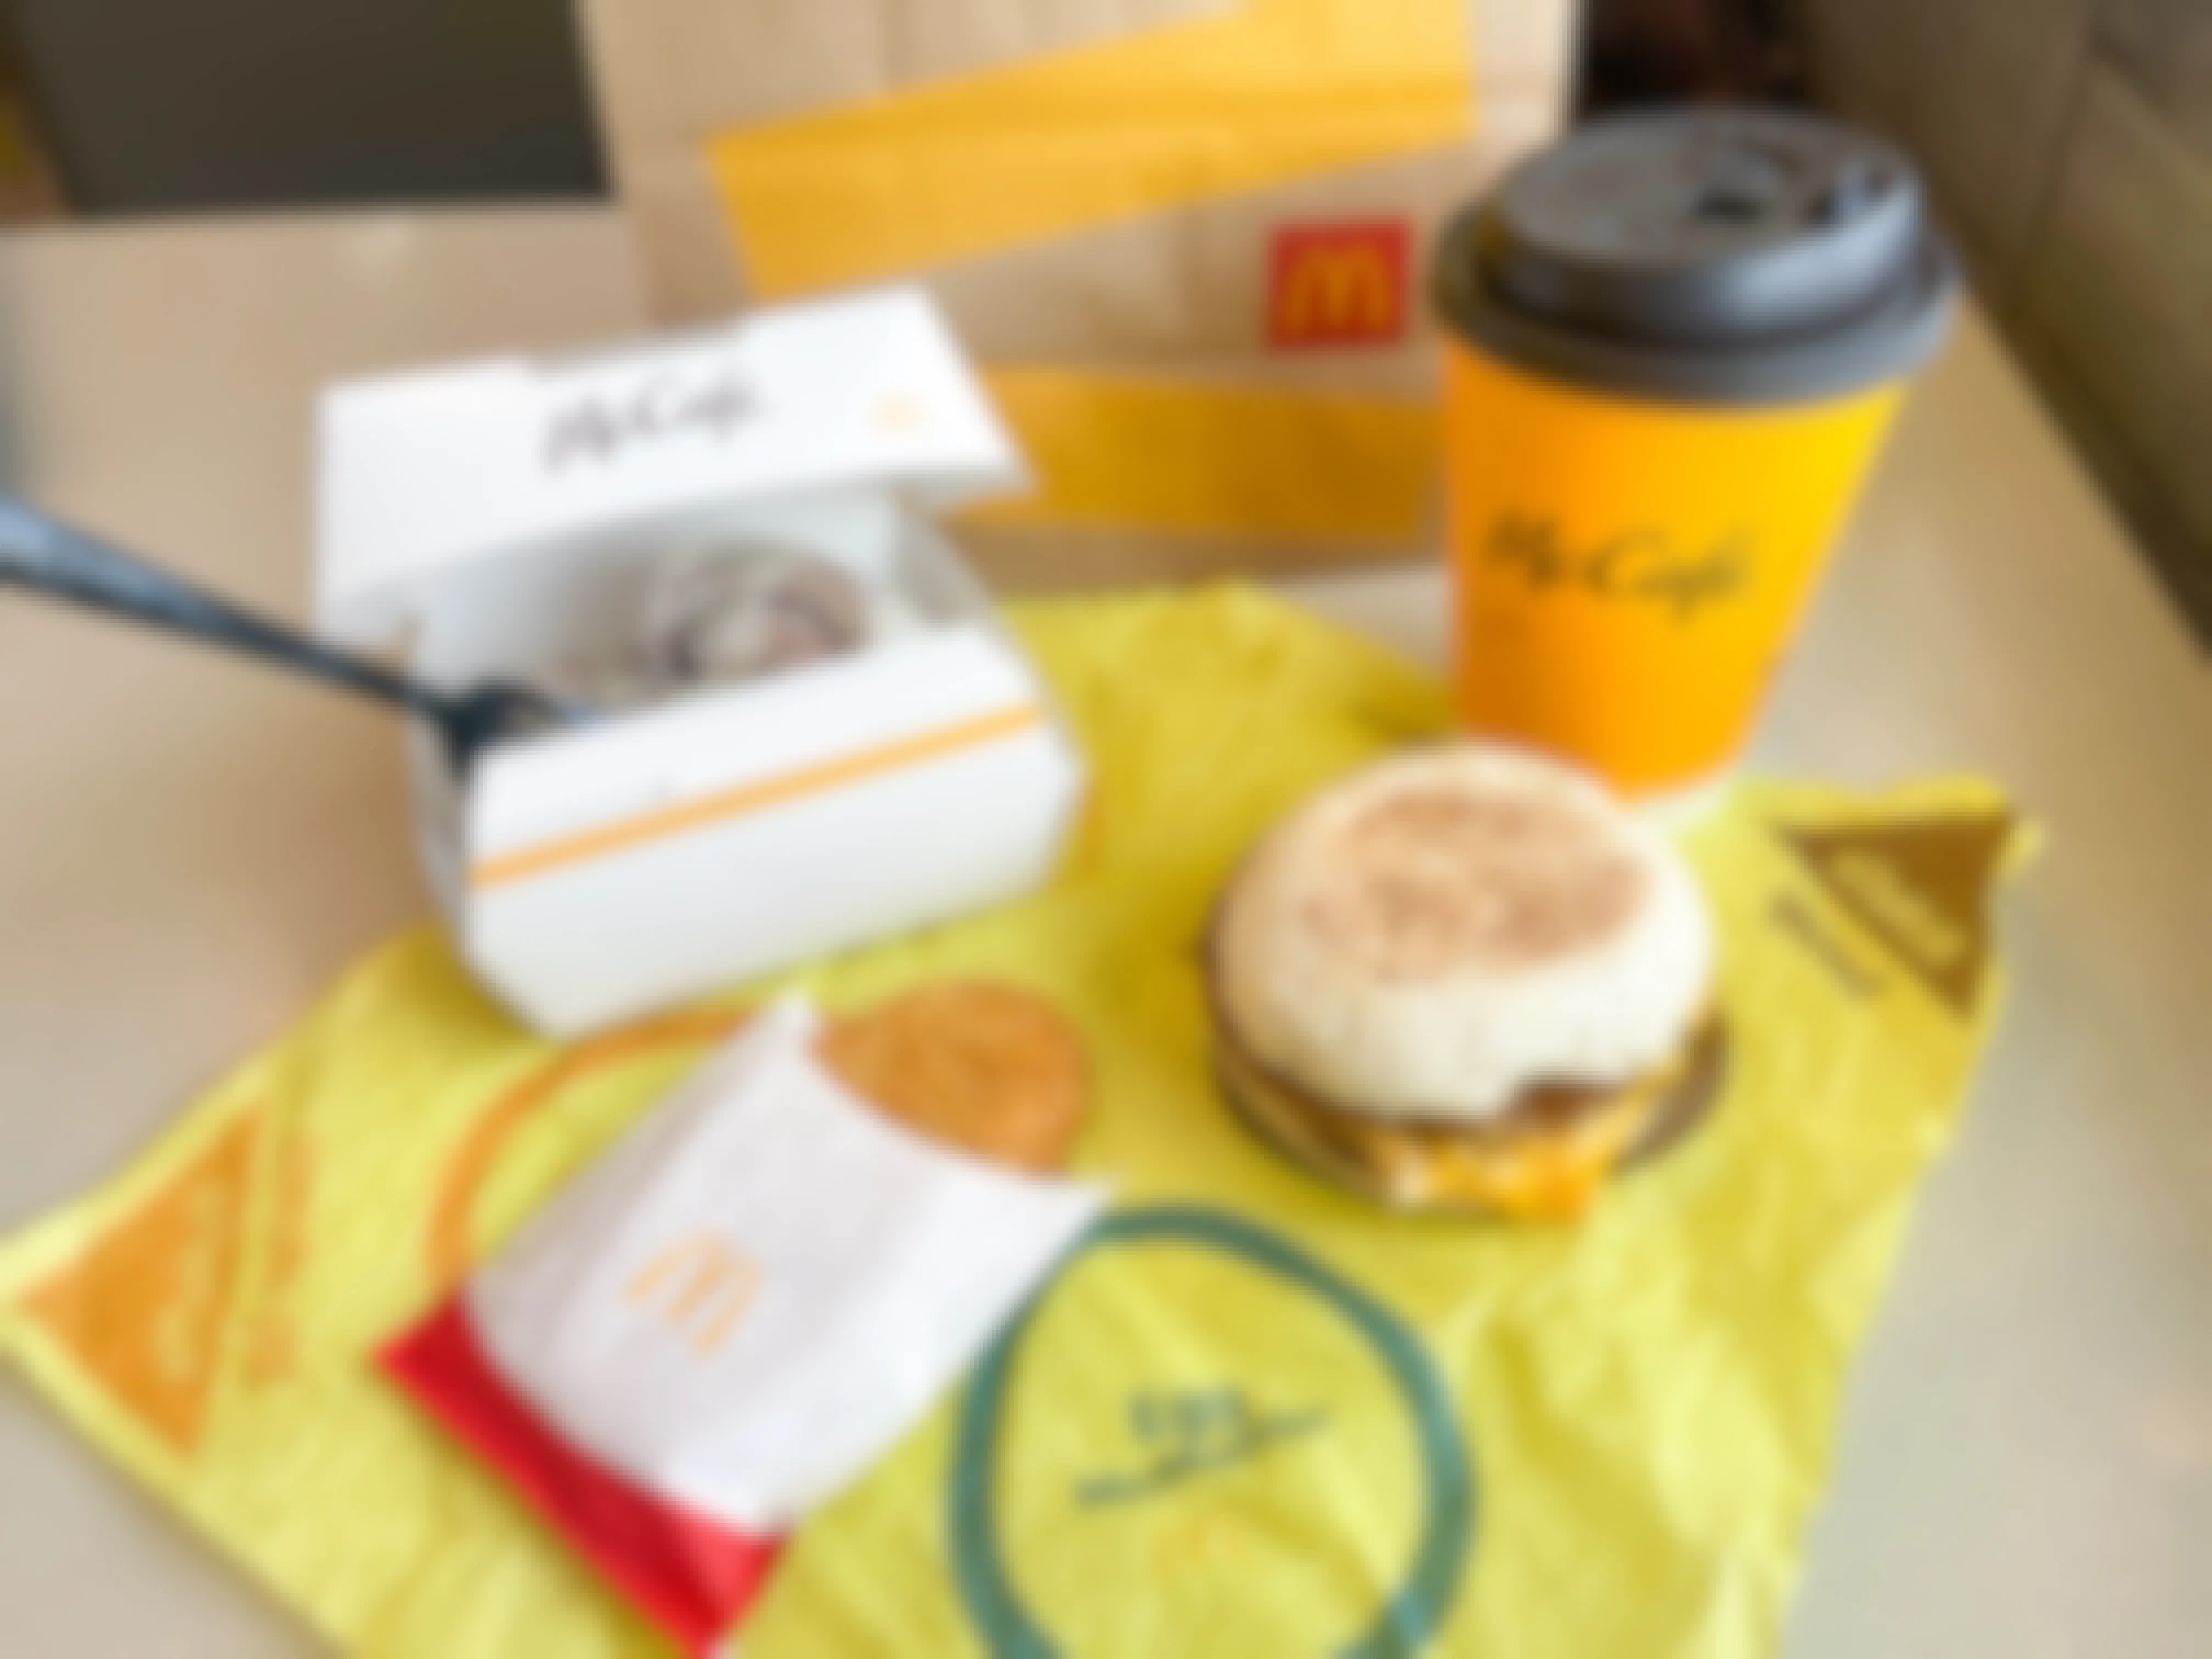 mcdonalds cinnamon roll, mcgriddle, hashbrown, and coffee breakfast on wrapper with bag